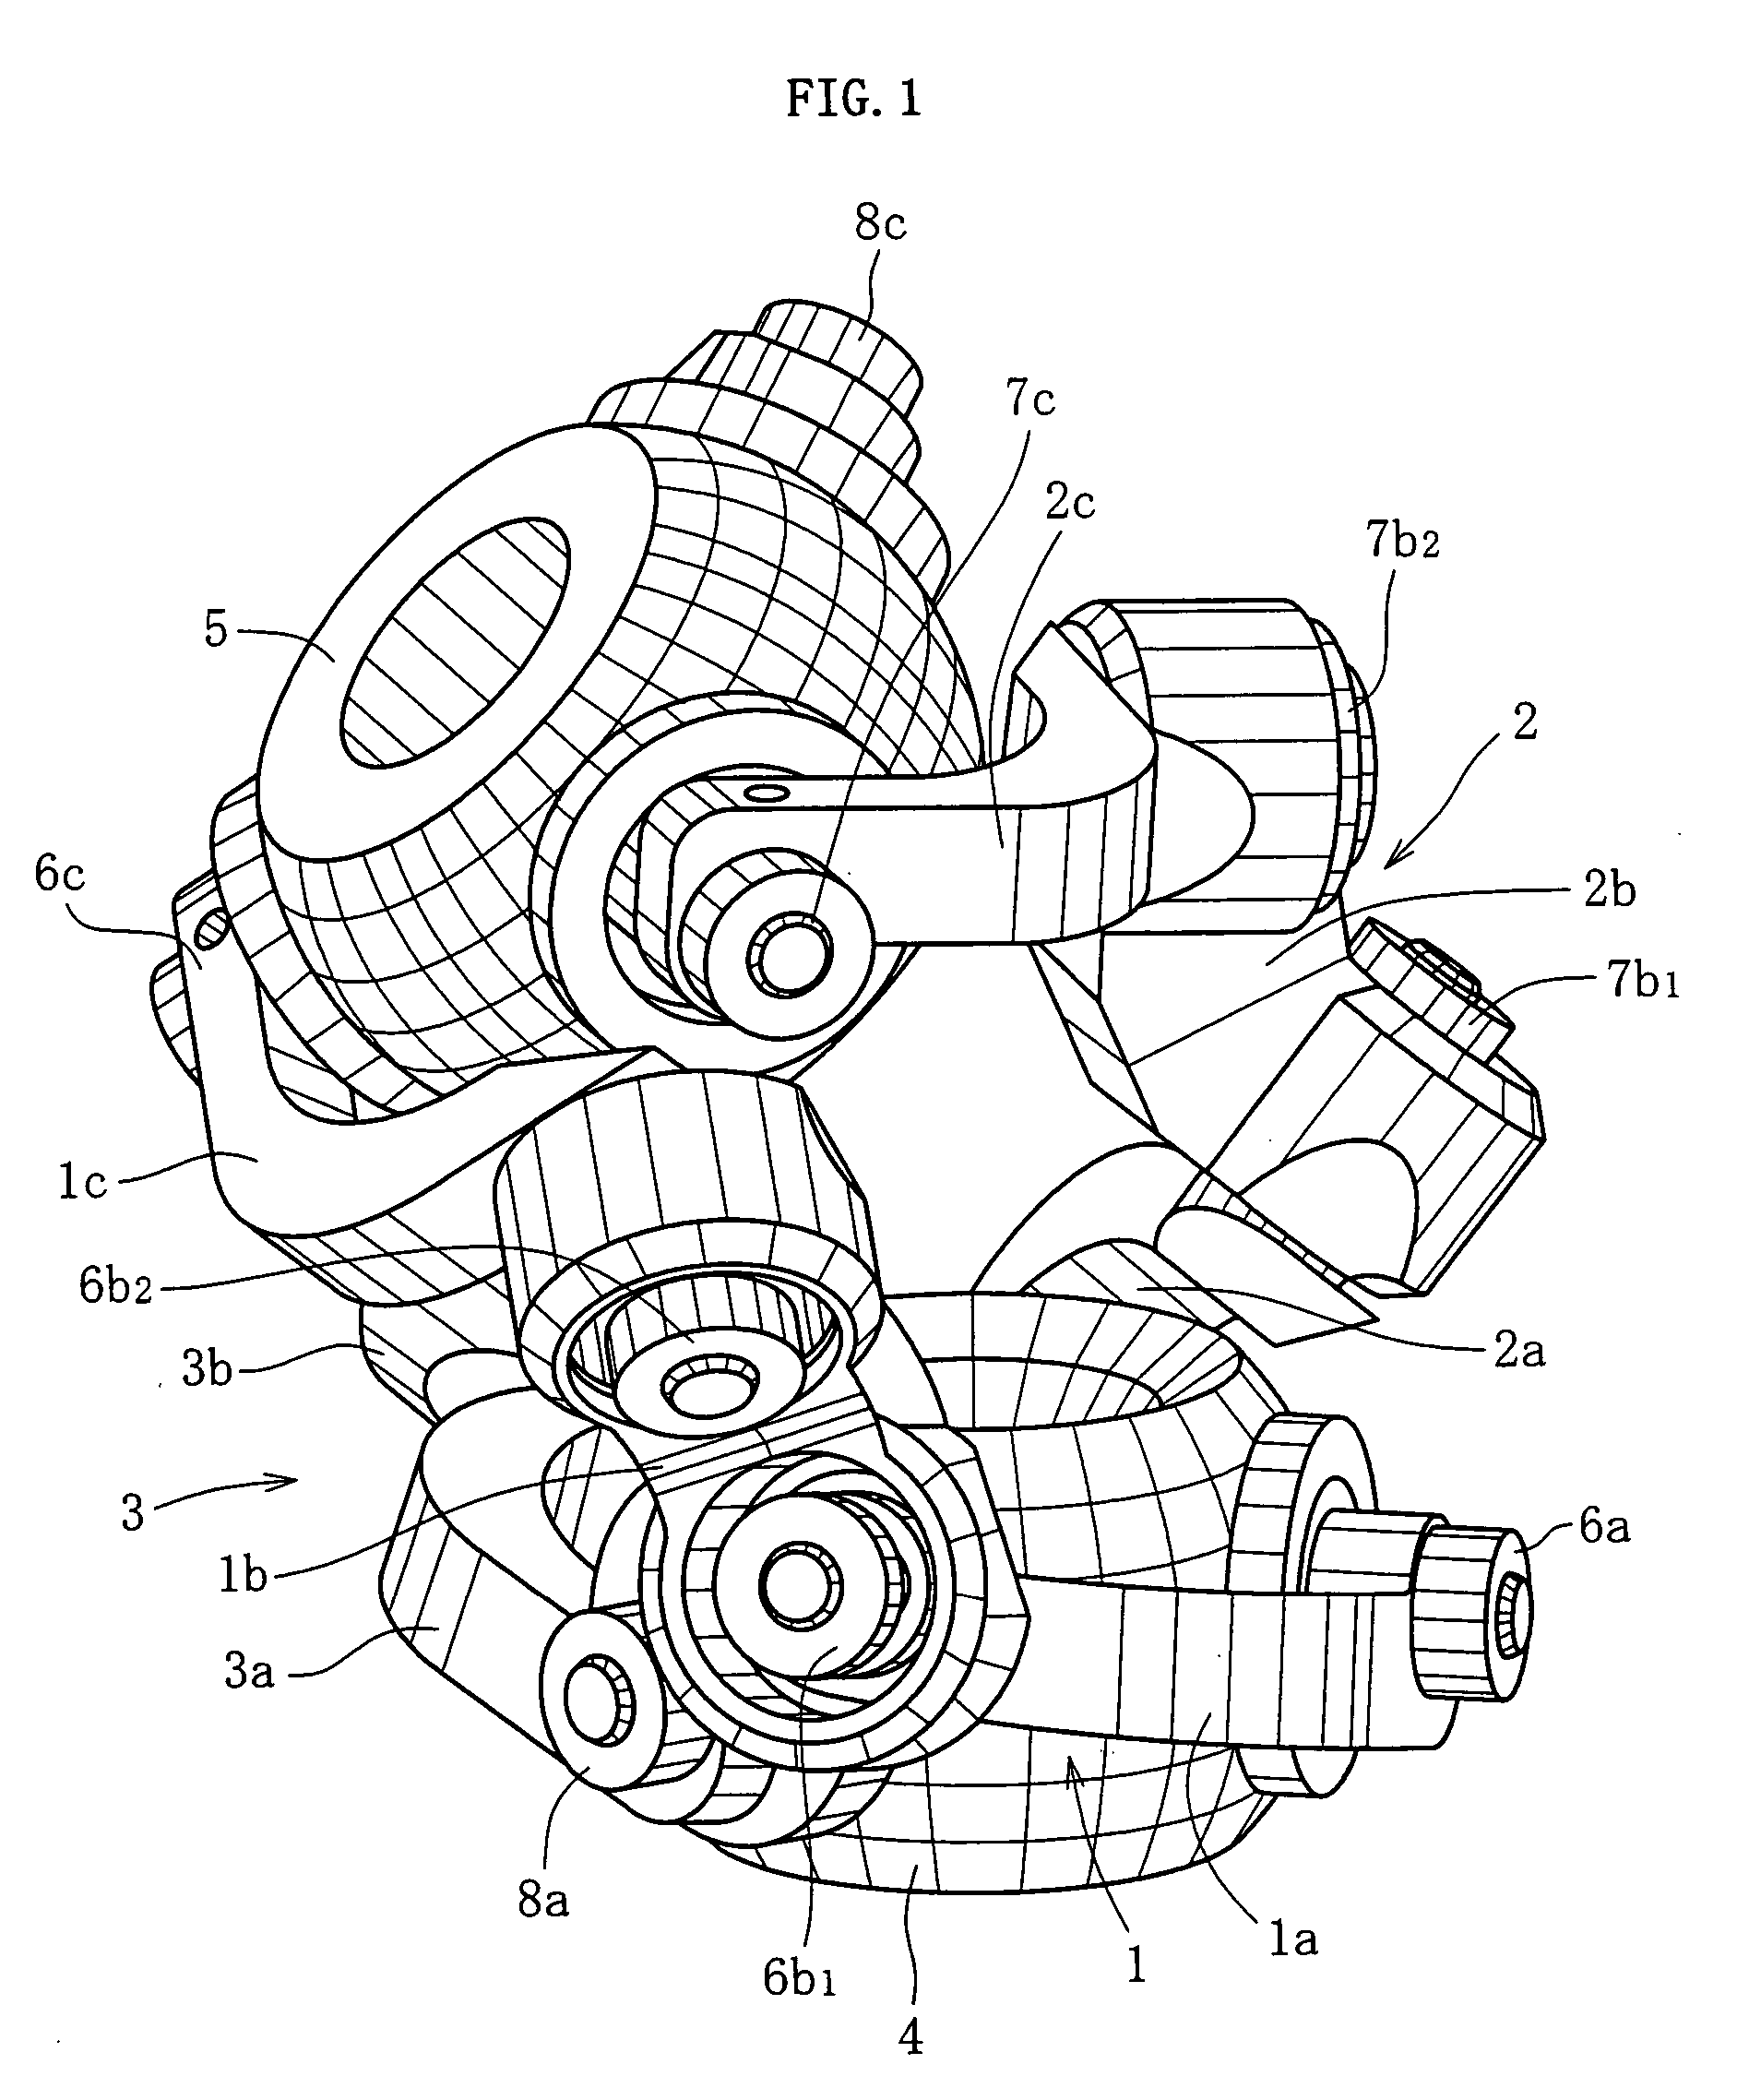 Link actuating device